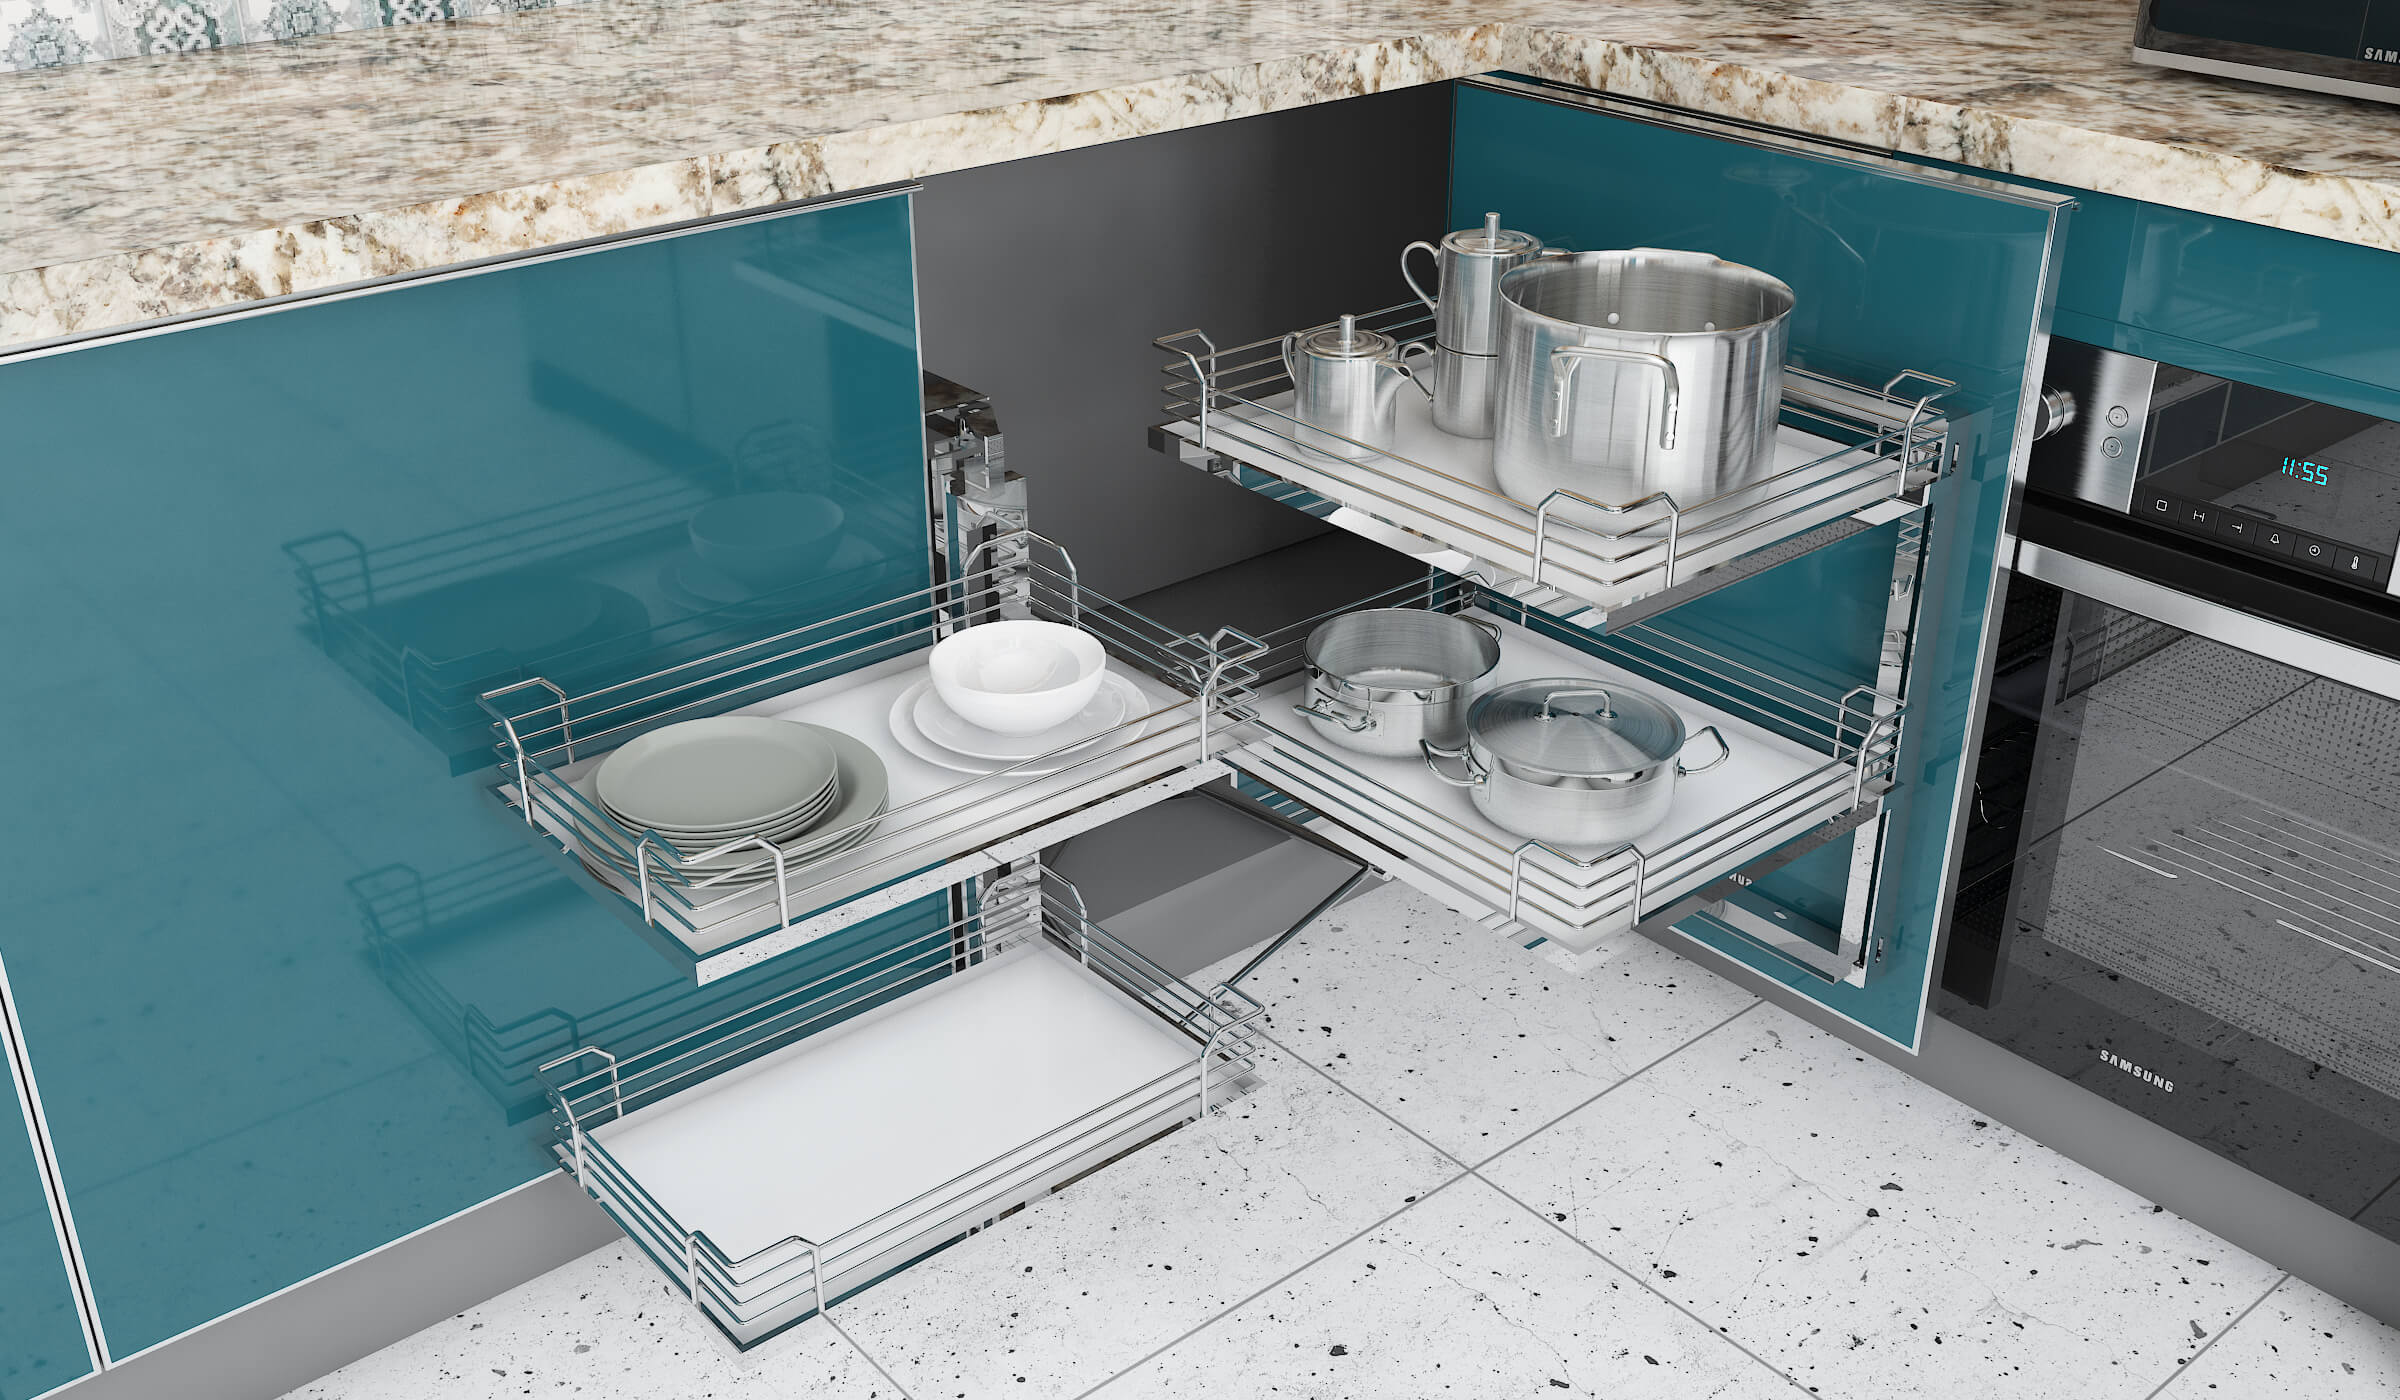 Maximize Storage Space in Your Modular Kitchen with Magic Pull Outs in kitchen design fir small space